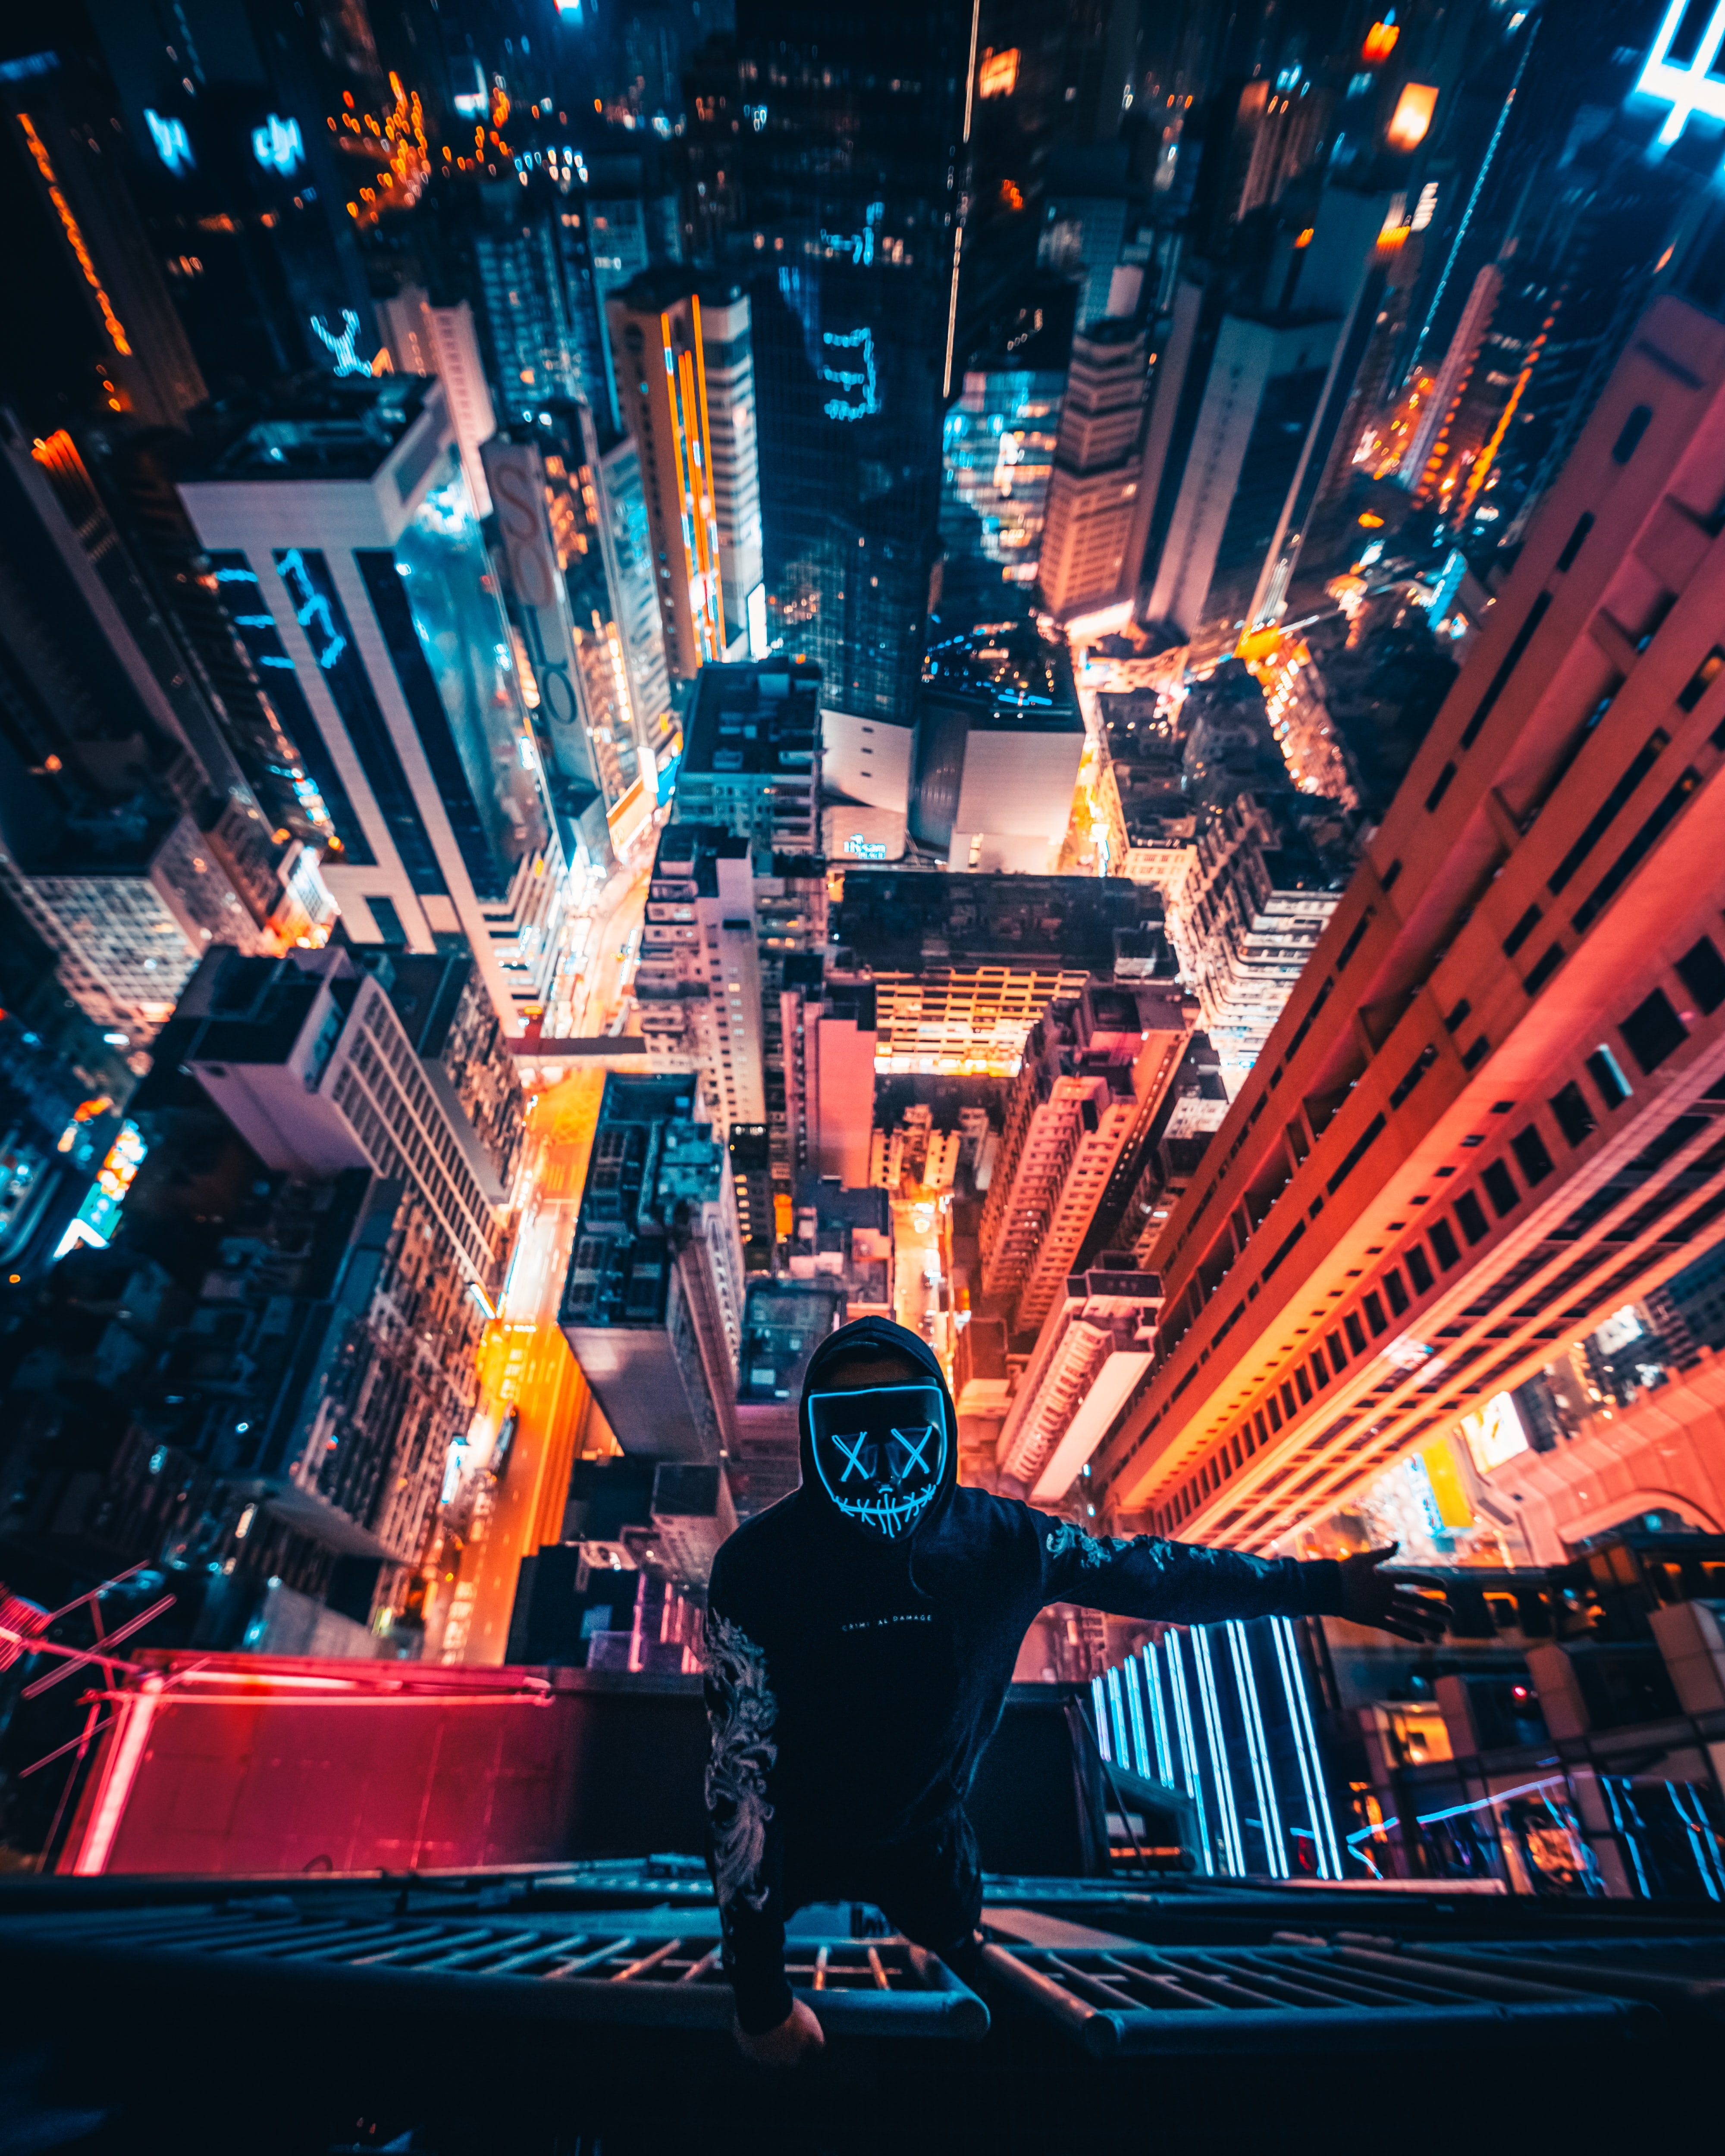 HD wallpaper, Aerial View, Neon Mask, Cityscape, Persons In Mask, City Lights, 5K, Nightscape, Skyscrapers, Rooftop, Hong Kong City